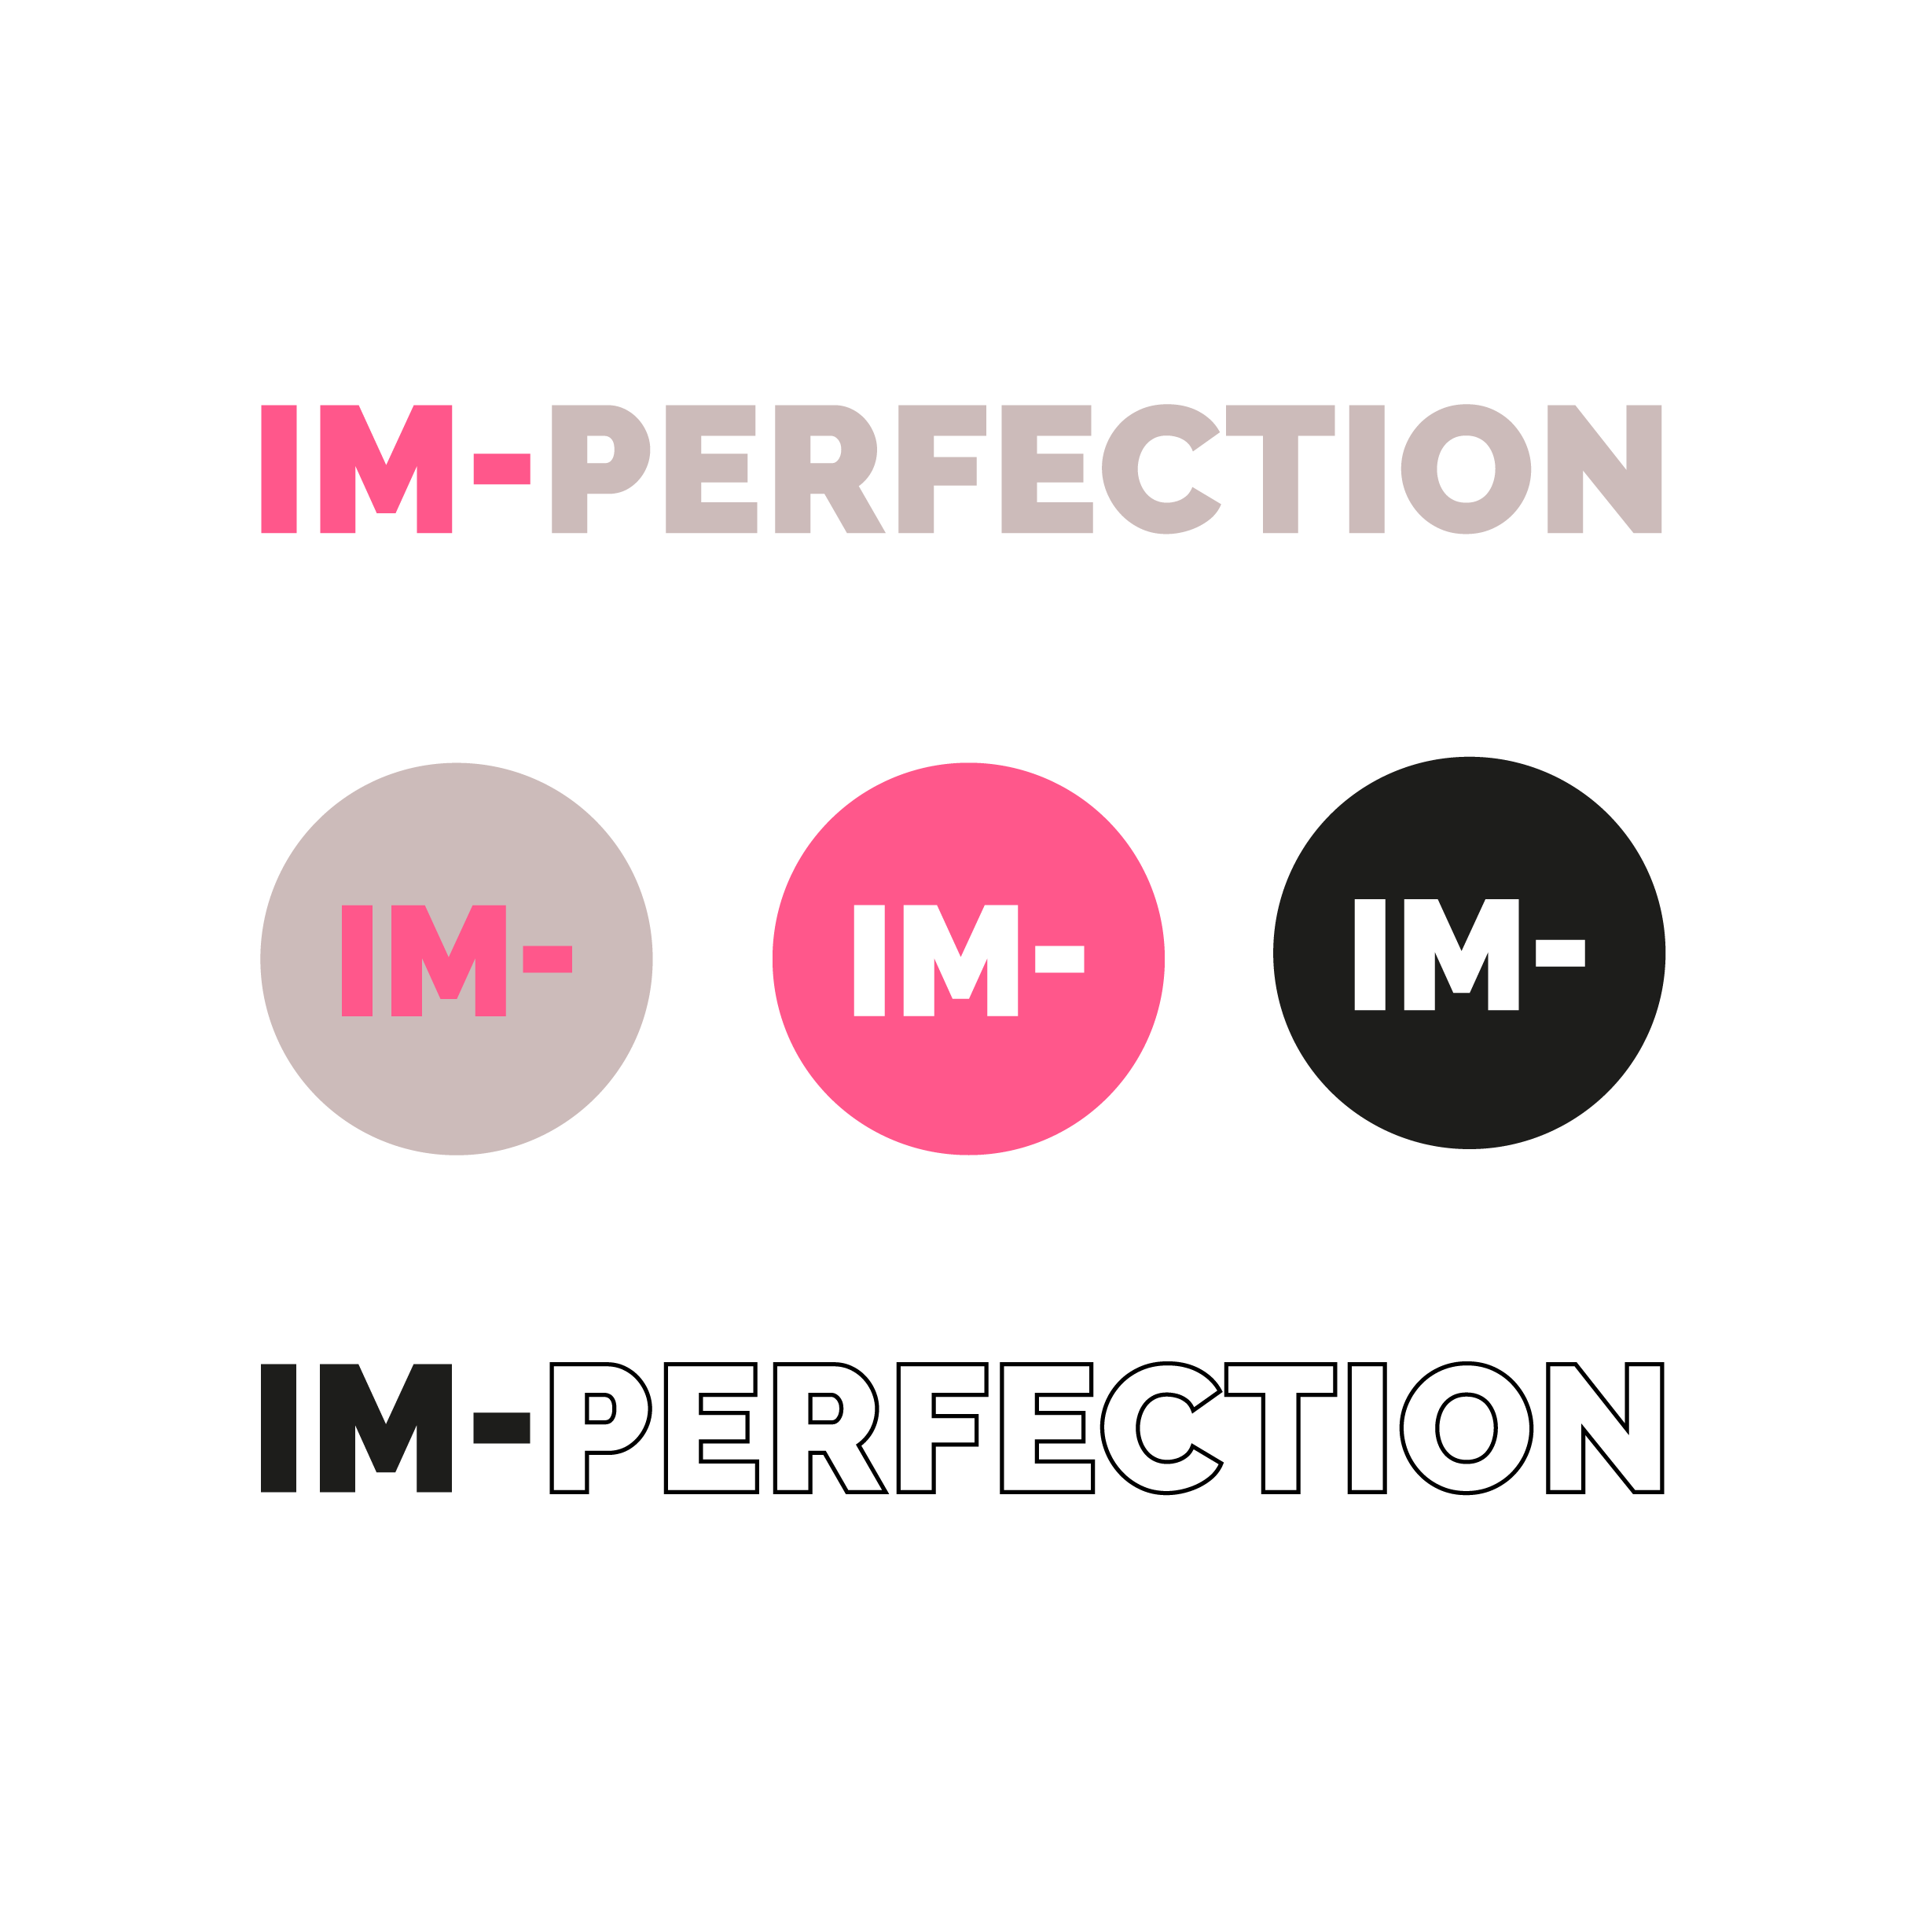 W_IM-PERFECTION_PAGEPROJET5